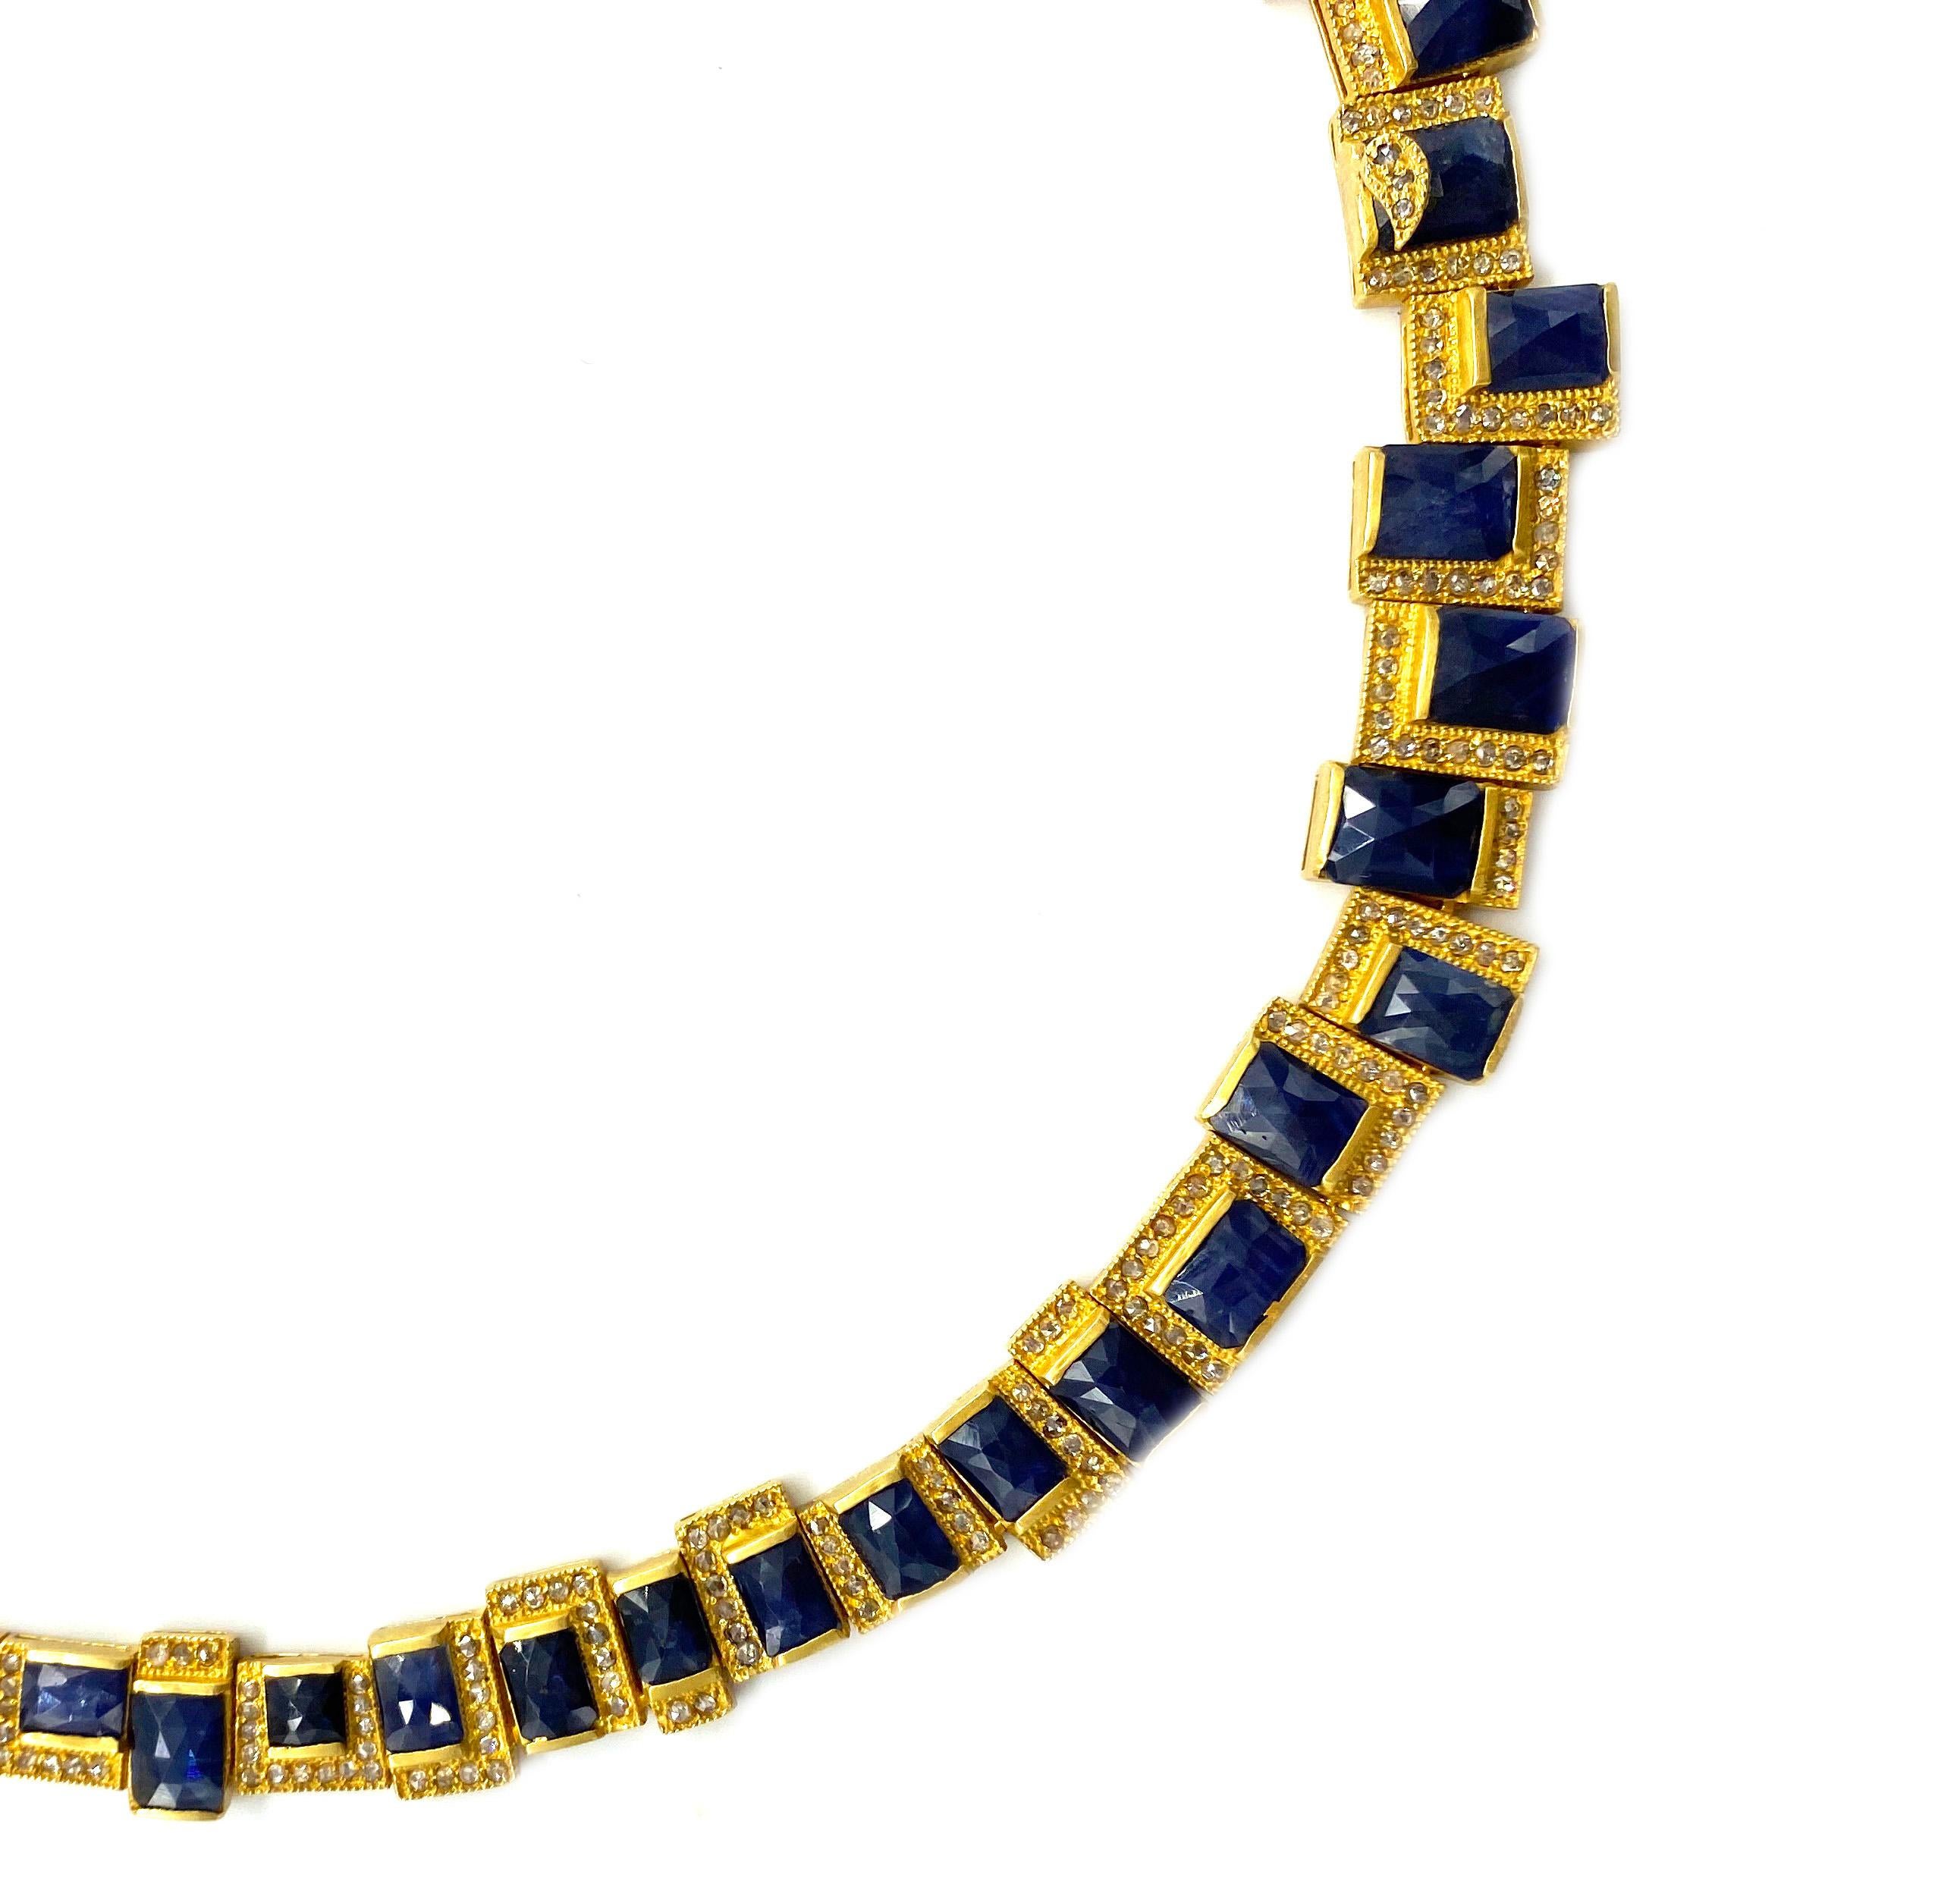 Stunning and one of a kind piece from Coomi set in rich 20 karat Yellow Gold with Sapphire weighing at approximately 47.61cts and Diamonds at 4.33cts. This handmade statement necklace brought to you from the Luminosity Collection, which is inspired